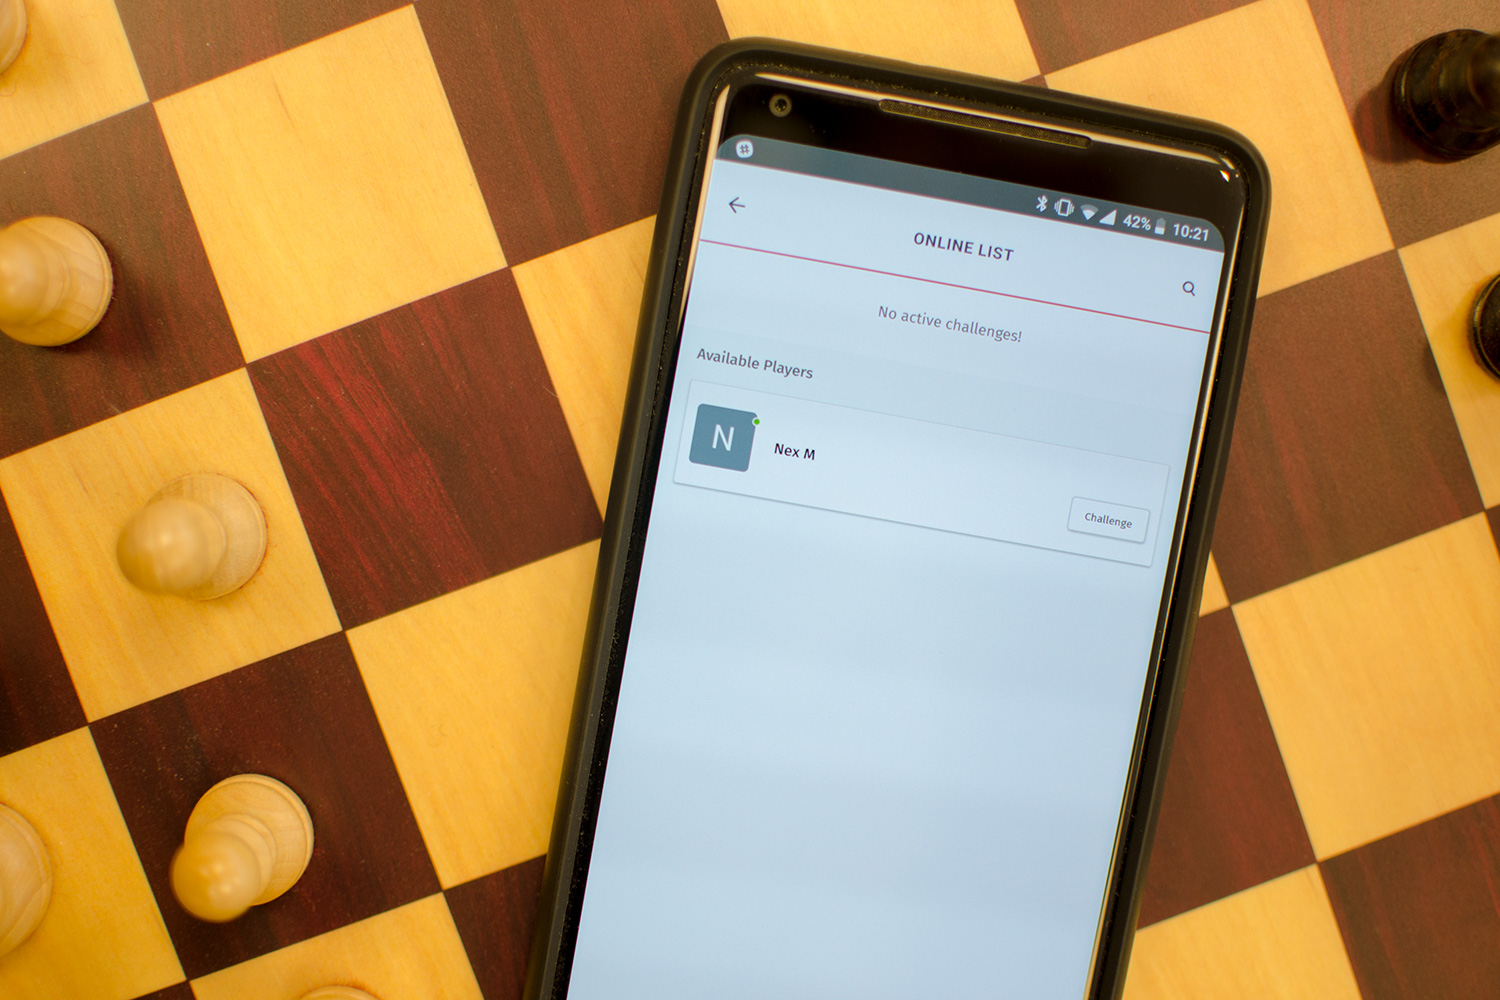 square off chess board experience squareoff phone online list